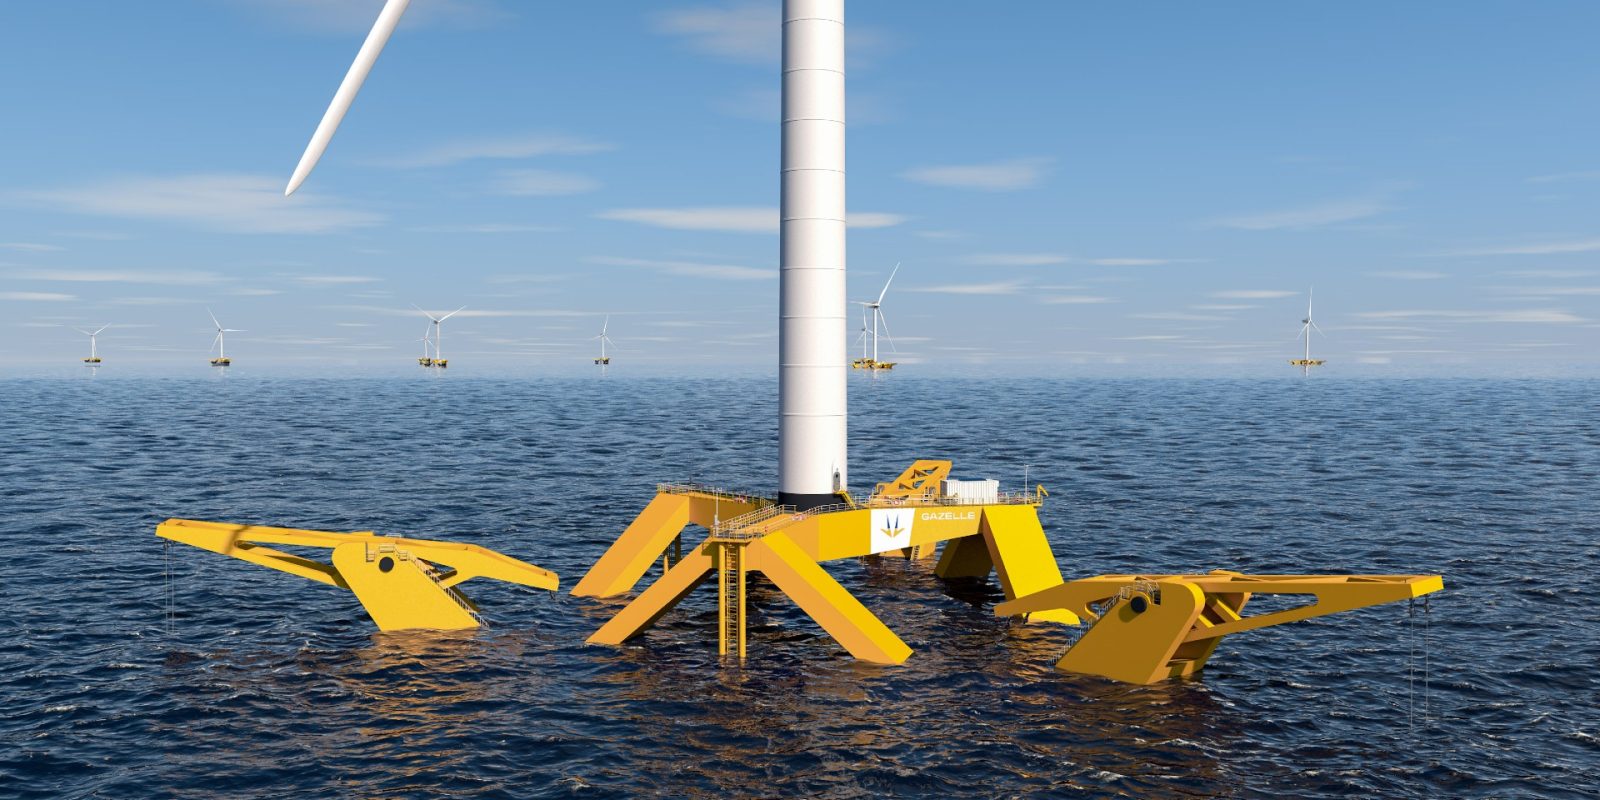 Floating wind turbines could open up vast ocean tracts for